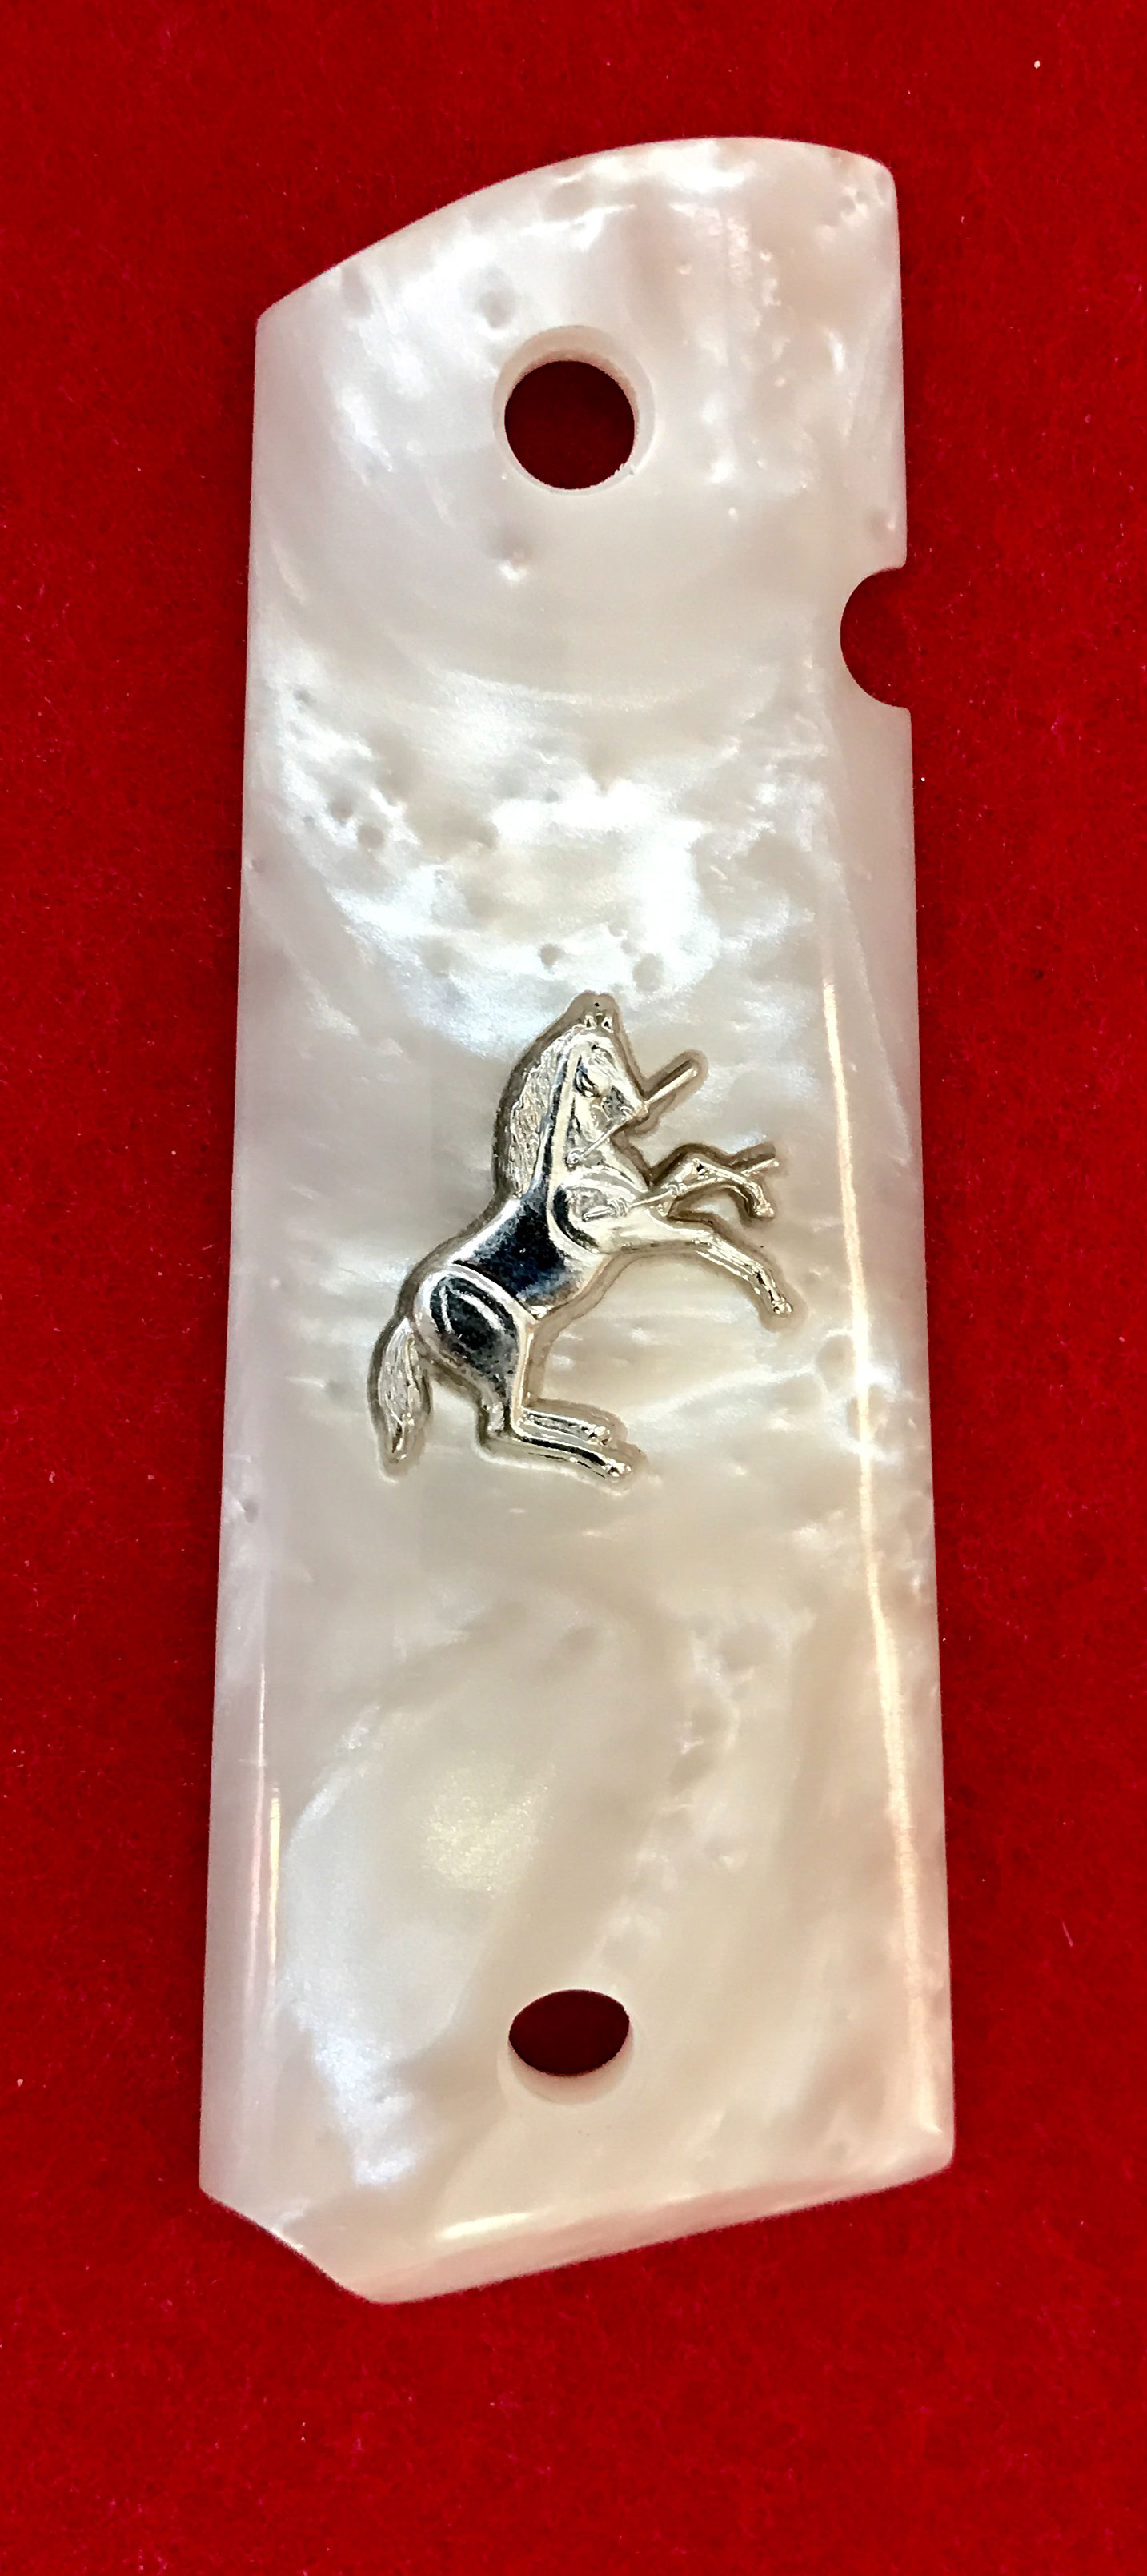 GRIP KING 1911 GRIPS,FITS COLT FULL SIZE GOVERNMENT & COMMANDER,SALE $45.73 FABULOUS SAMBAR STAG FAUX WOW REALISTIC LOOK FREE STANDARD SHIPPING. SILVER  RAMPANT HORSE  MEDALLIONS MADE IN U.S.A 